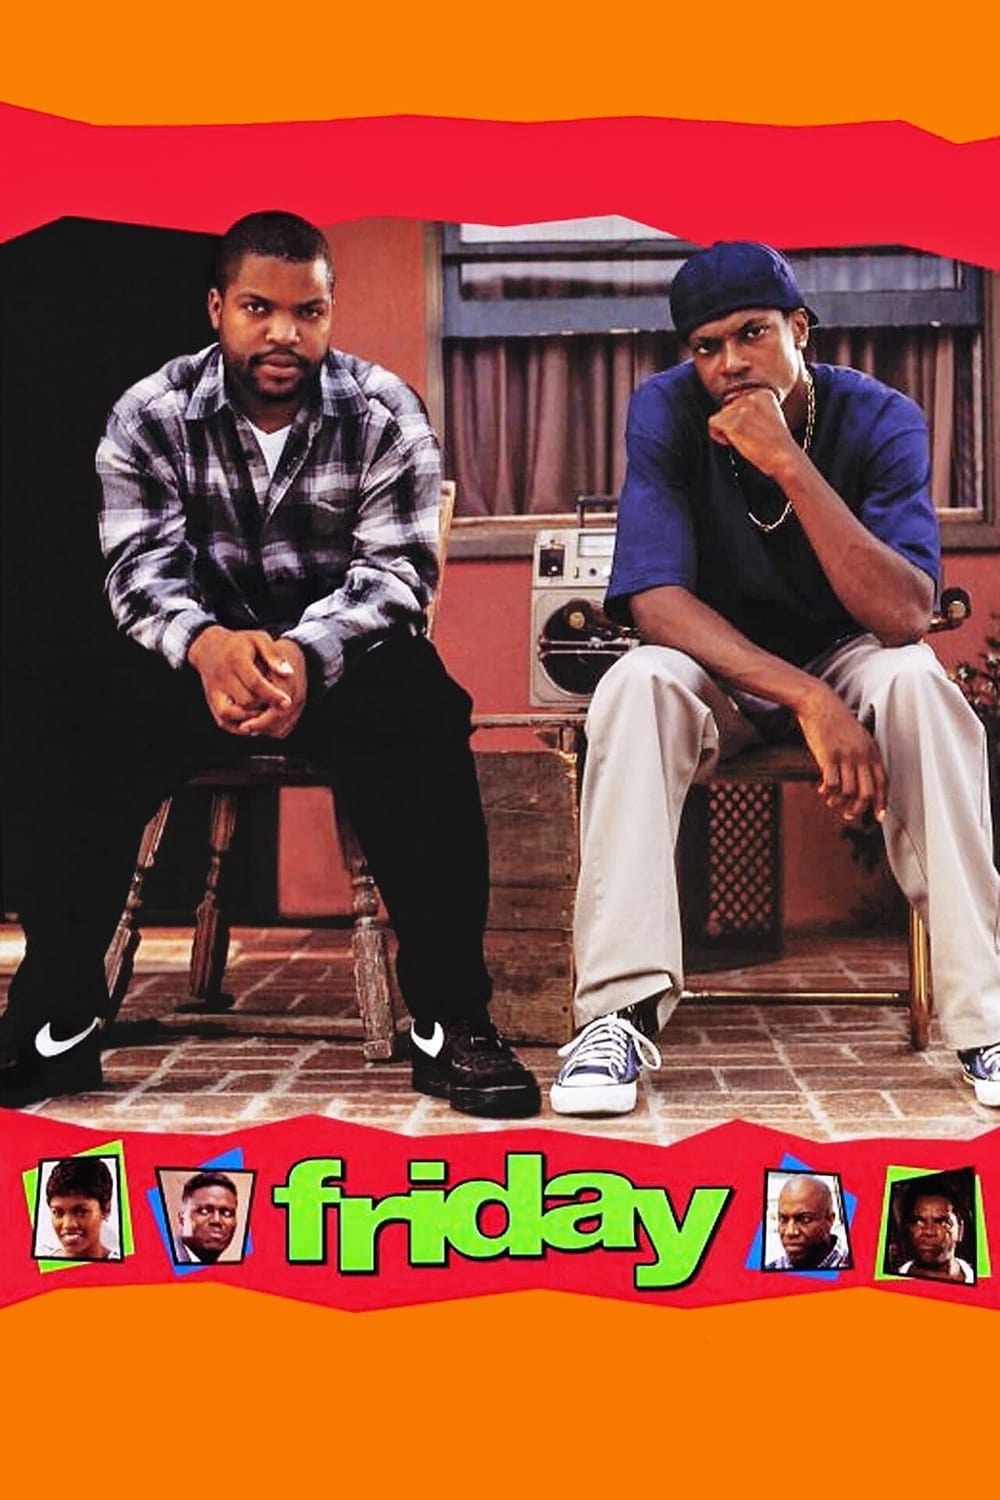 Friday (1995) | Poster